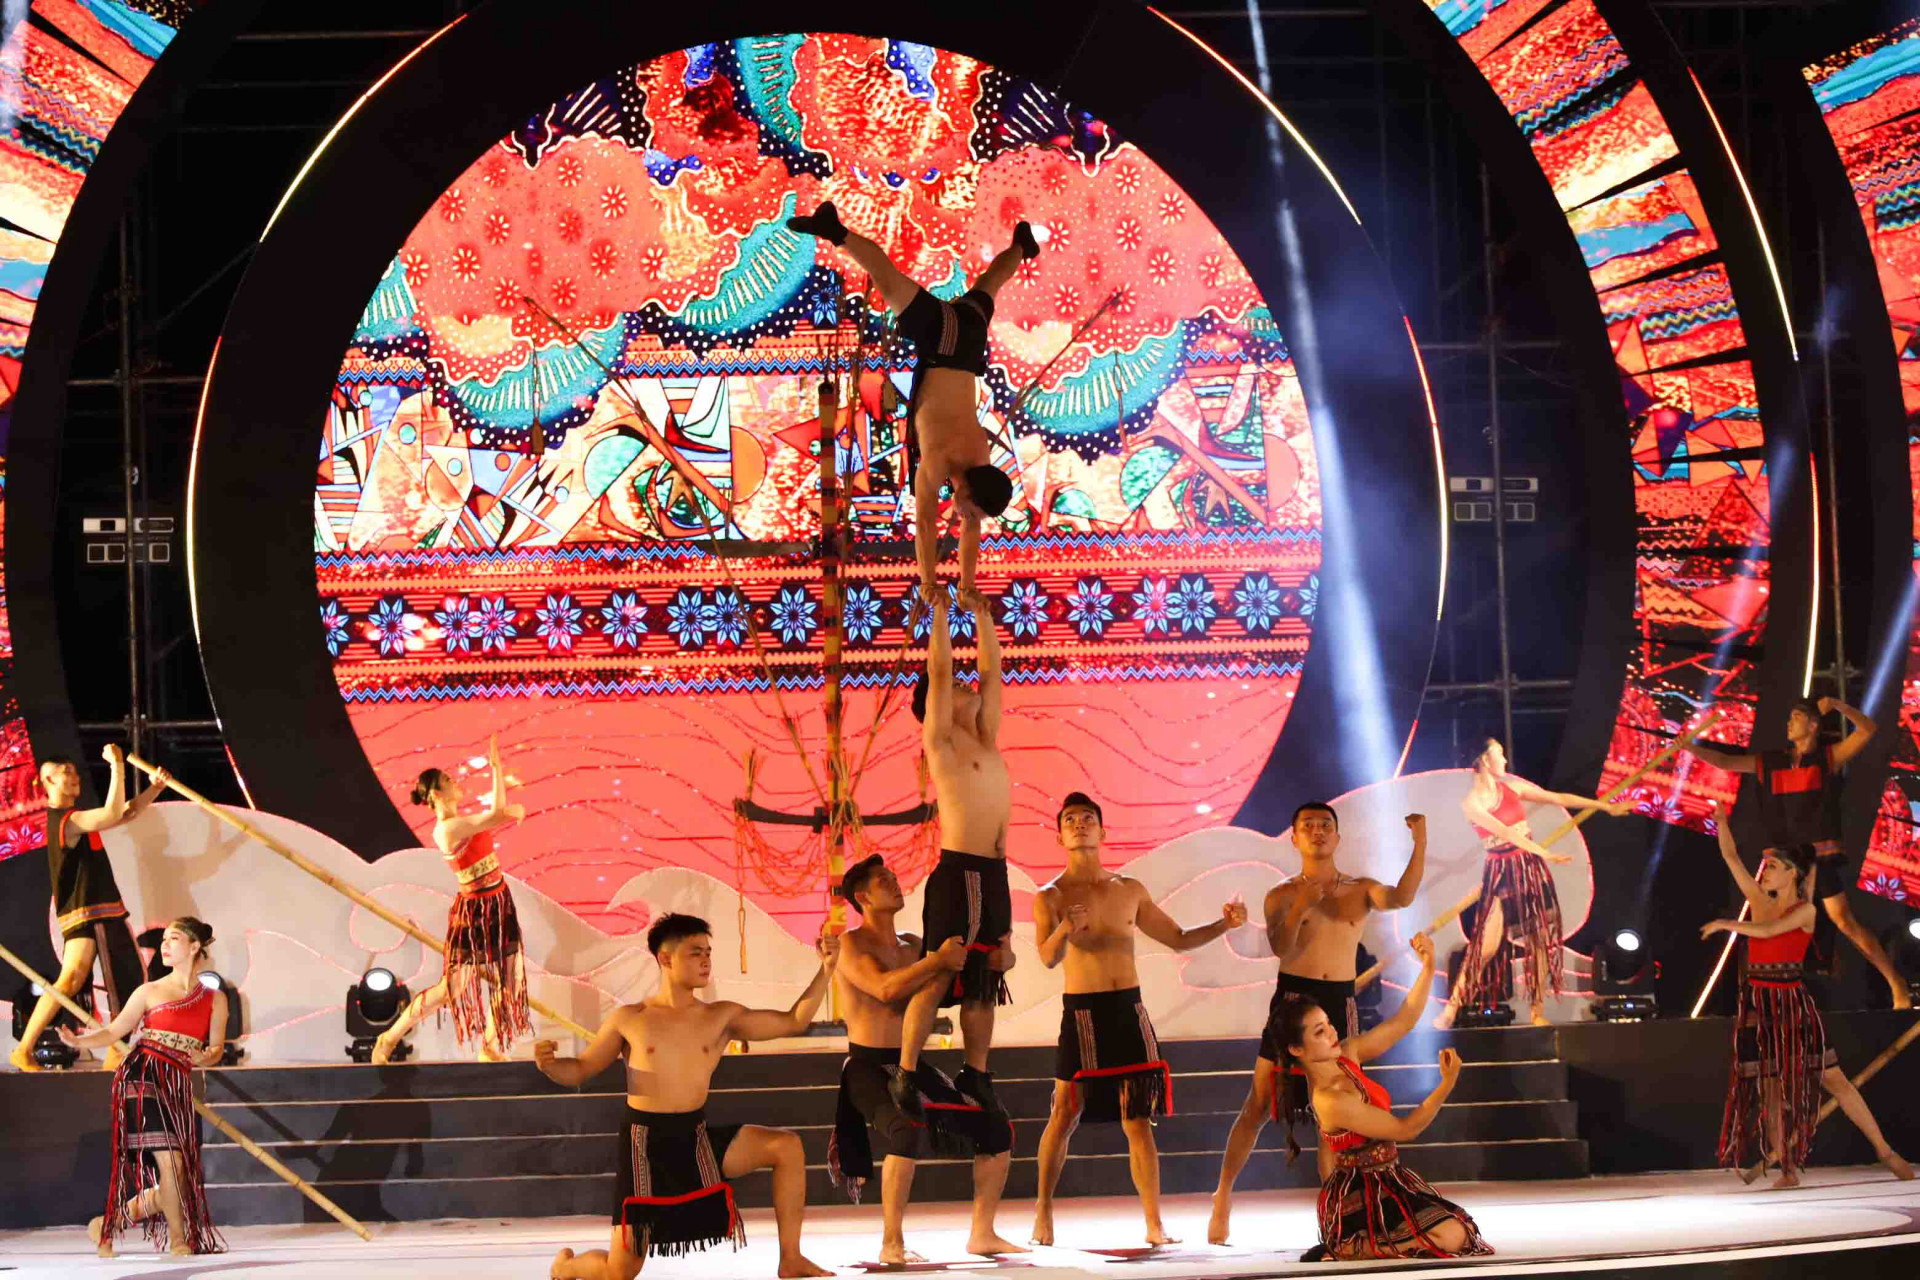 Circus performance inspired by Raglai people’s culture